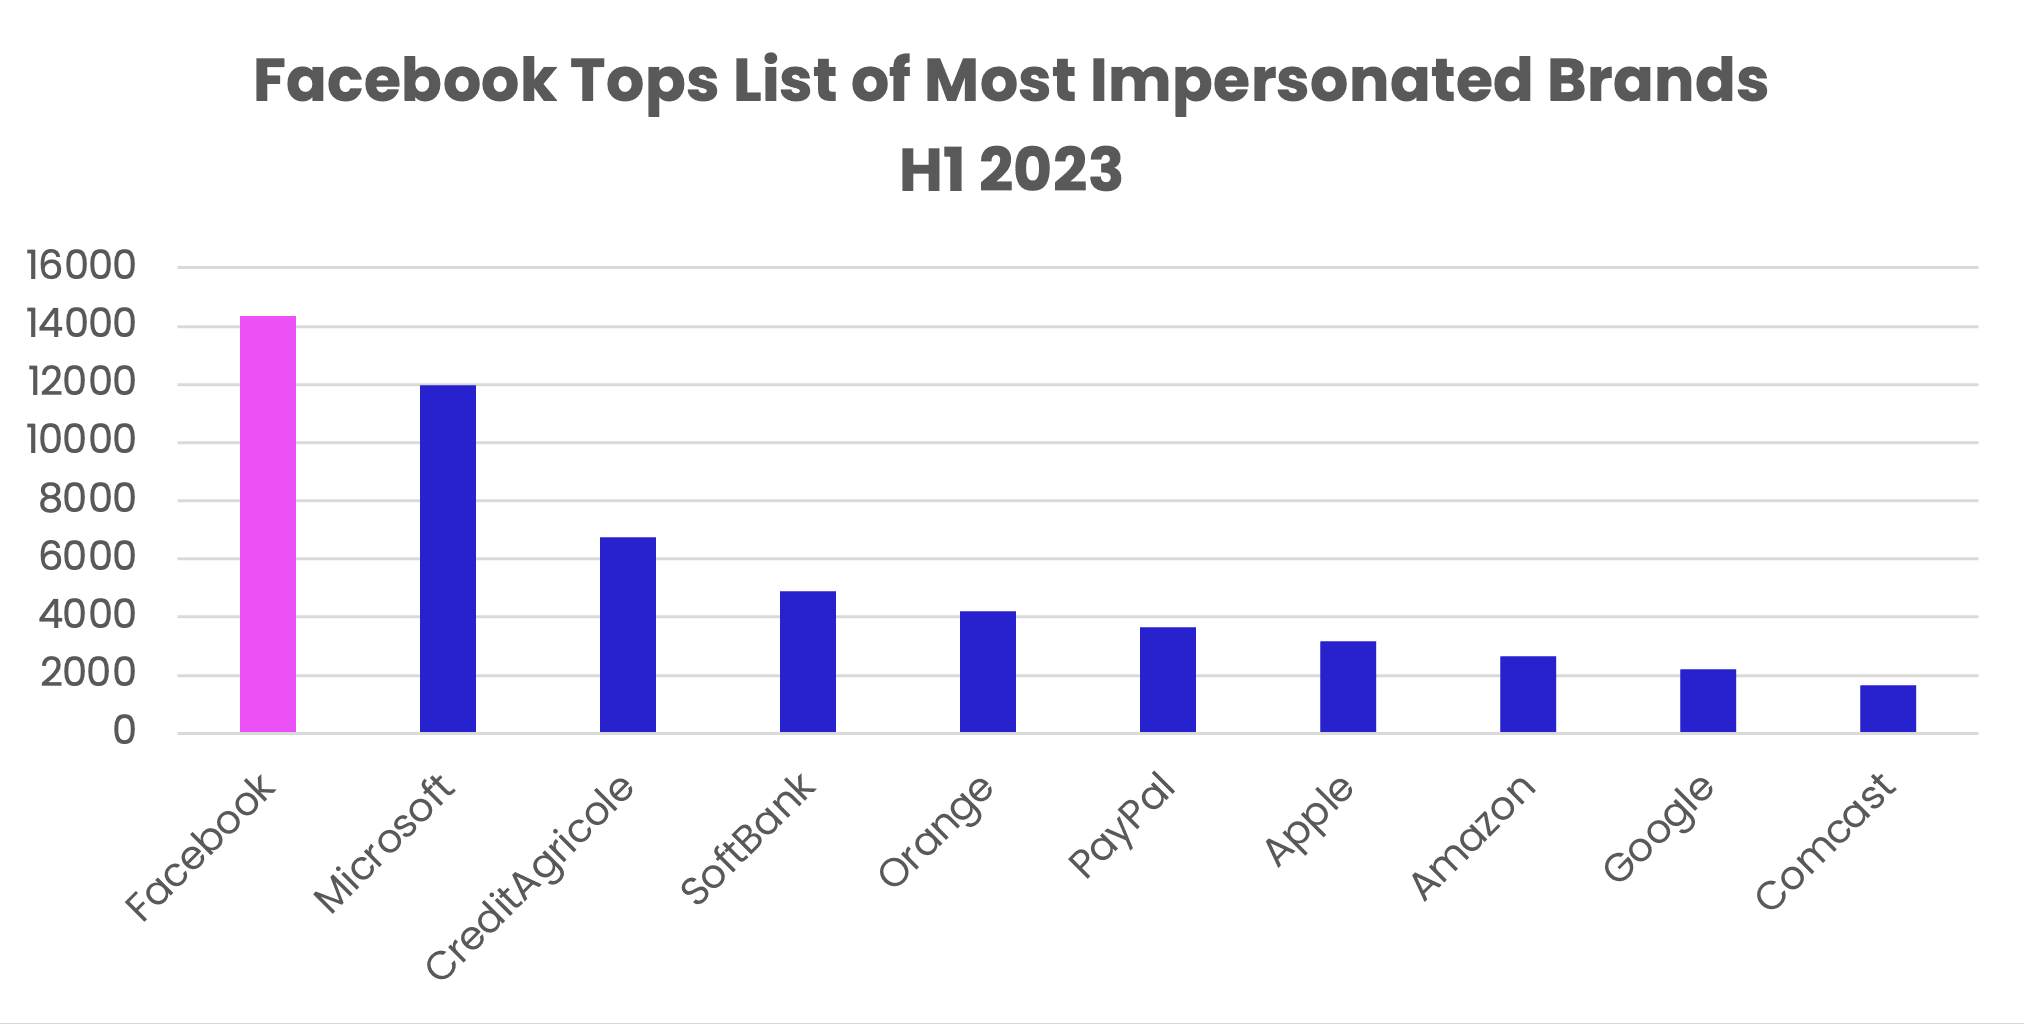 Phishing and malware – Top 10 most impersonated brands H1 2023